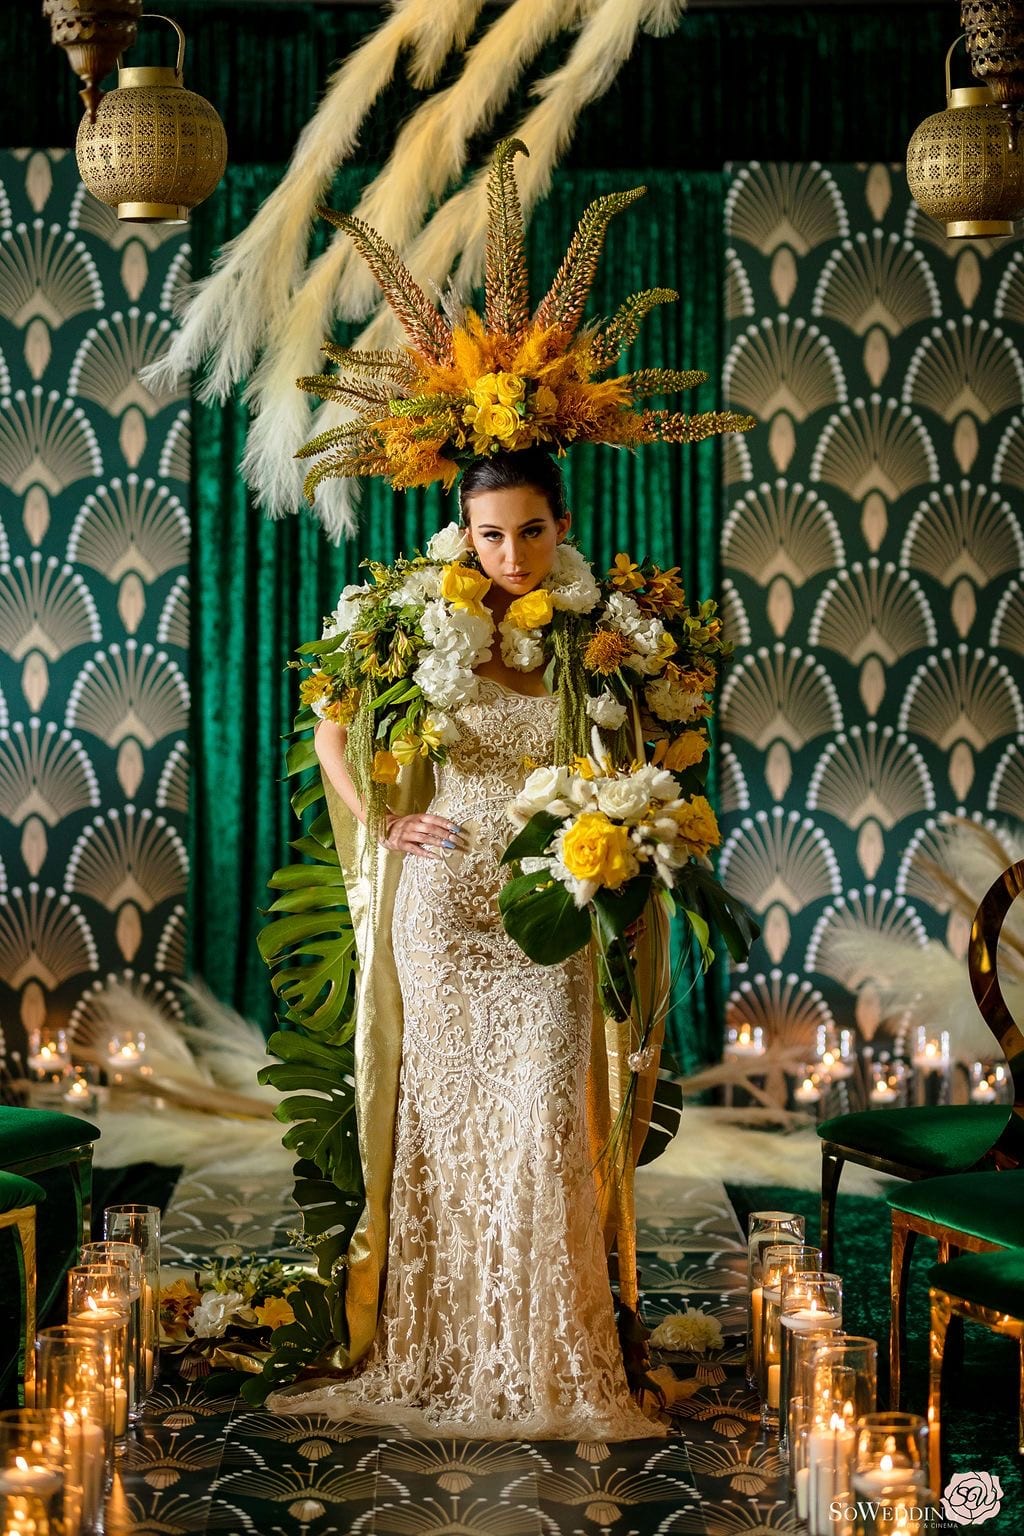 “Modern Cairo” Styled Shoot as Featured on WedLuxe Magazine